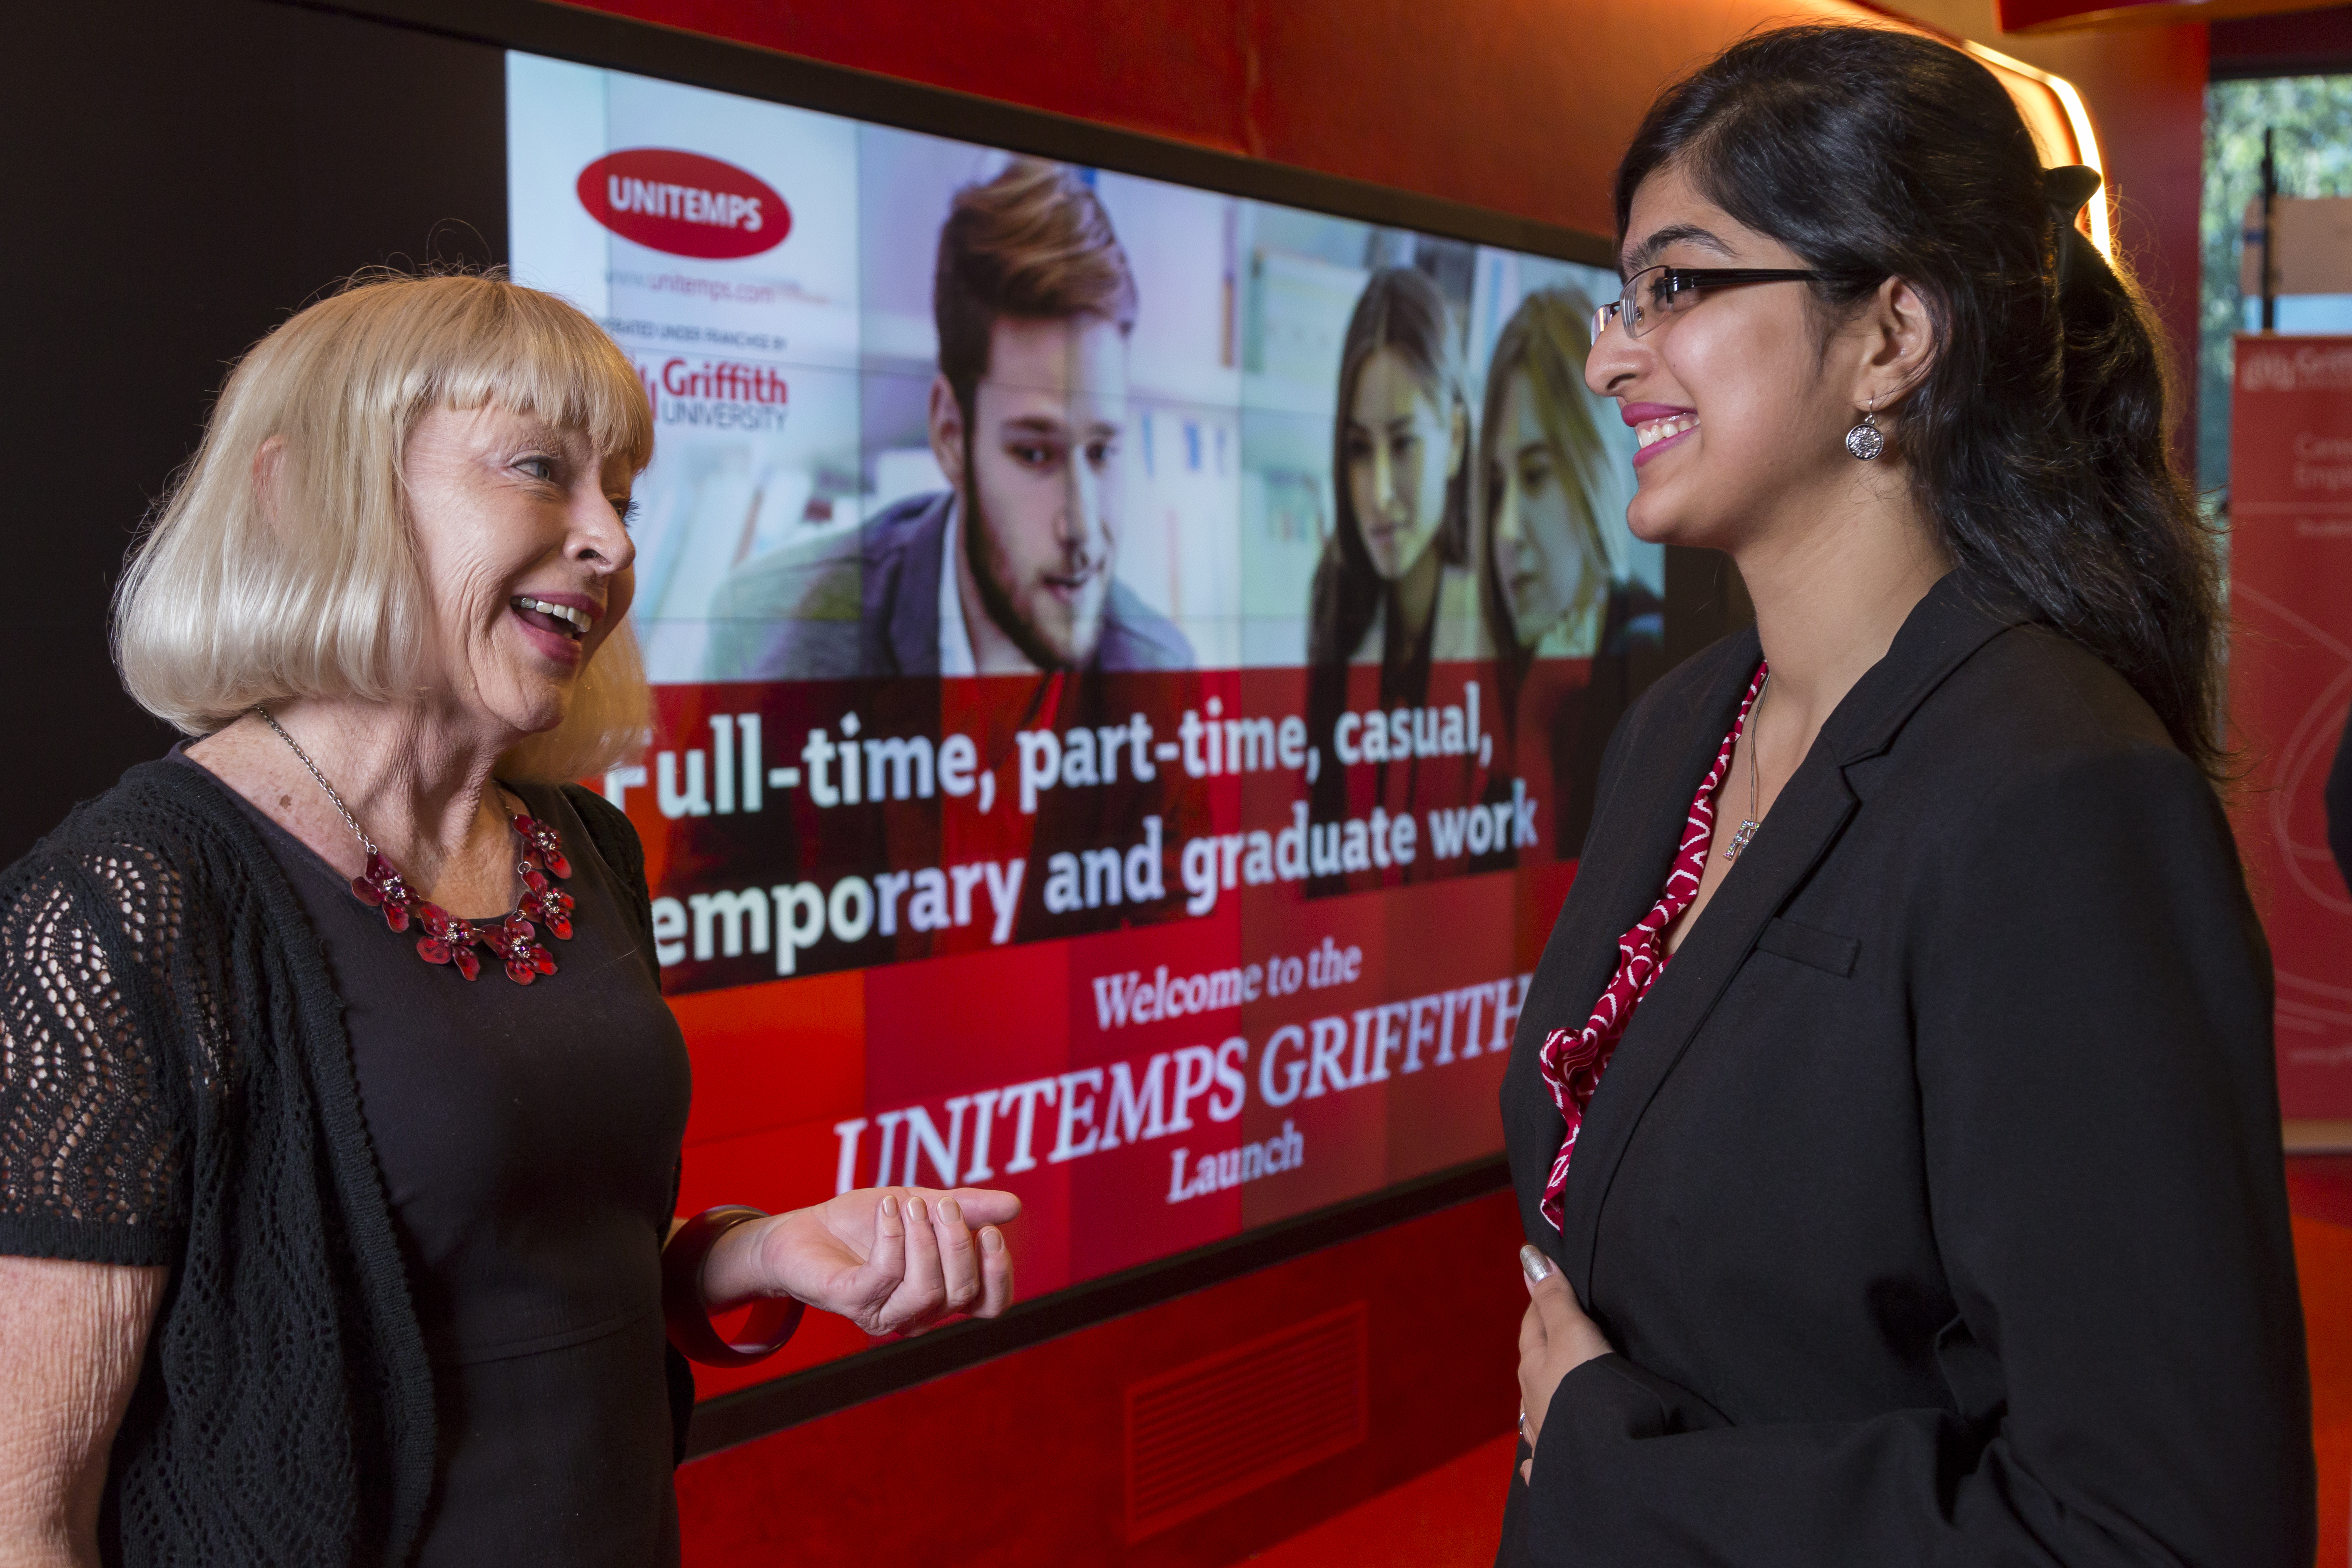 Unitemps Griffith has been launched at the Nathan and Gold Coast campuses.